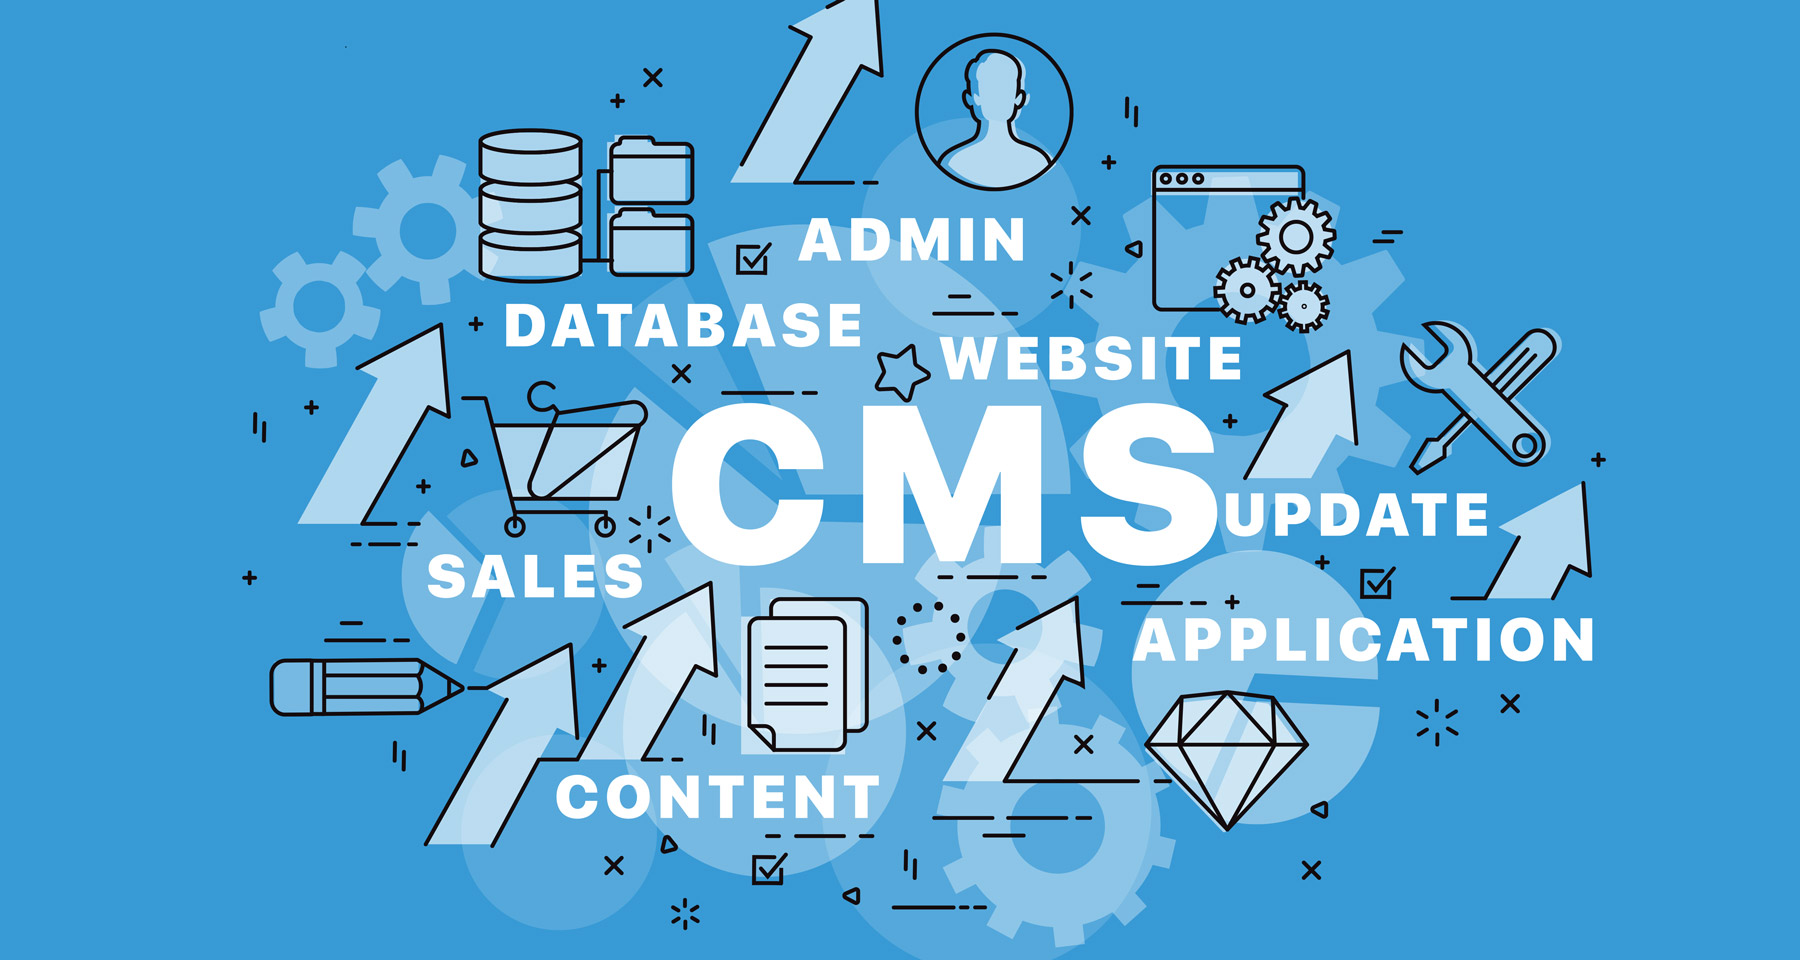 Application Image for CMS